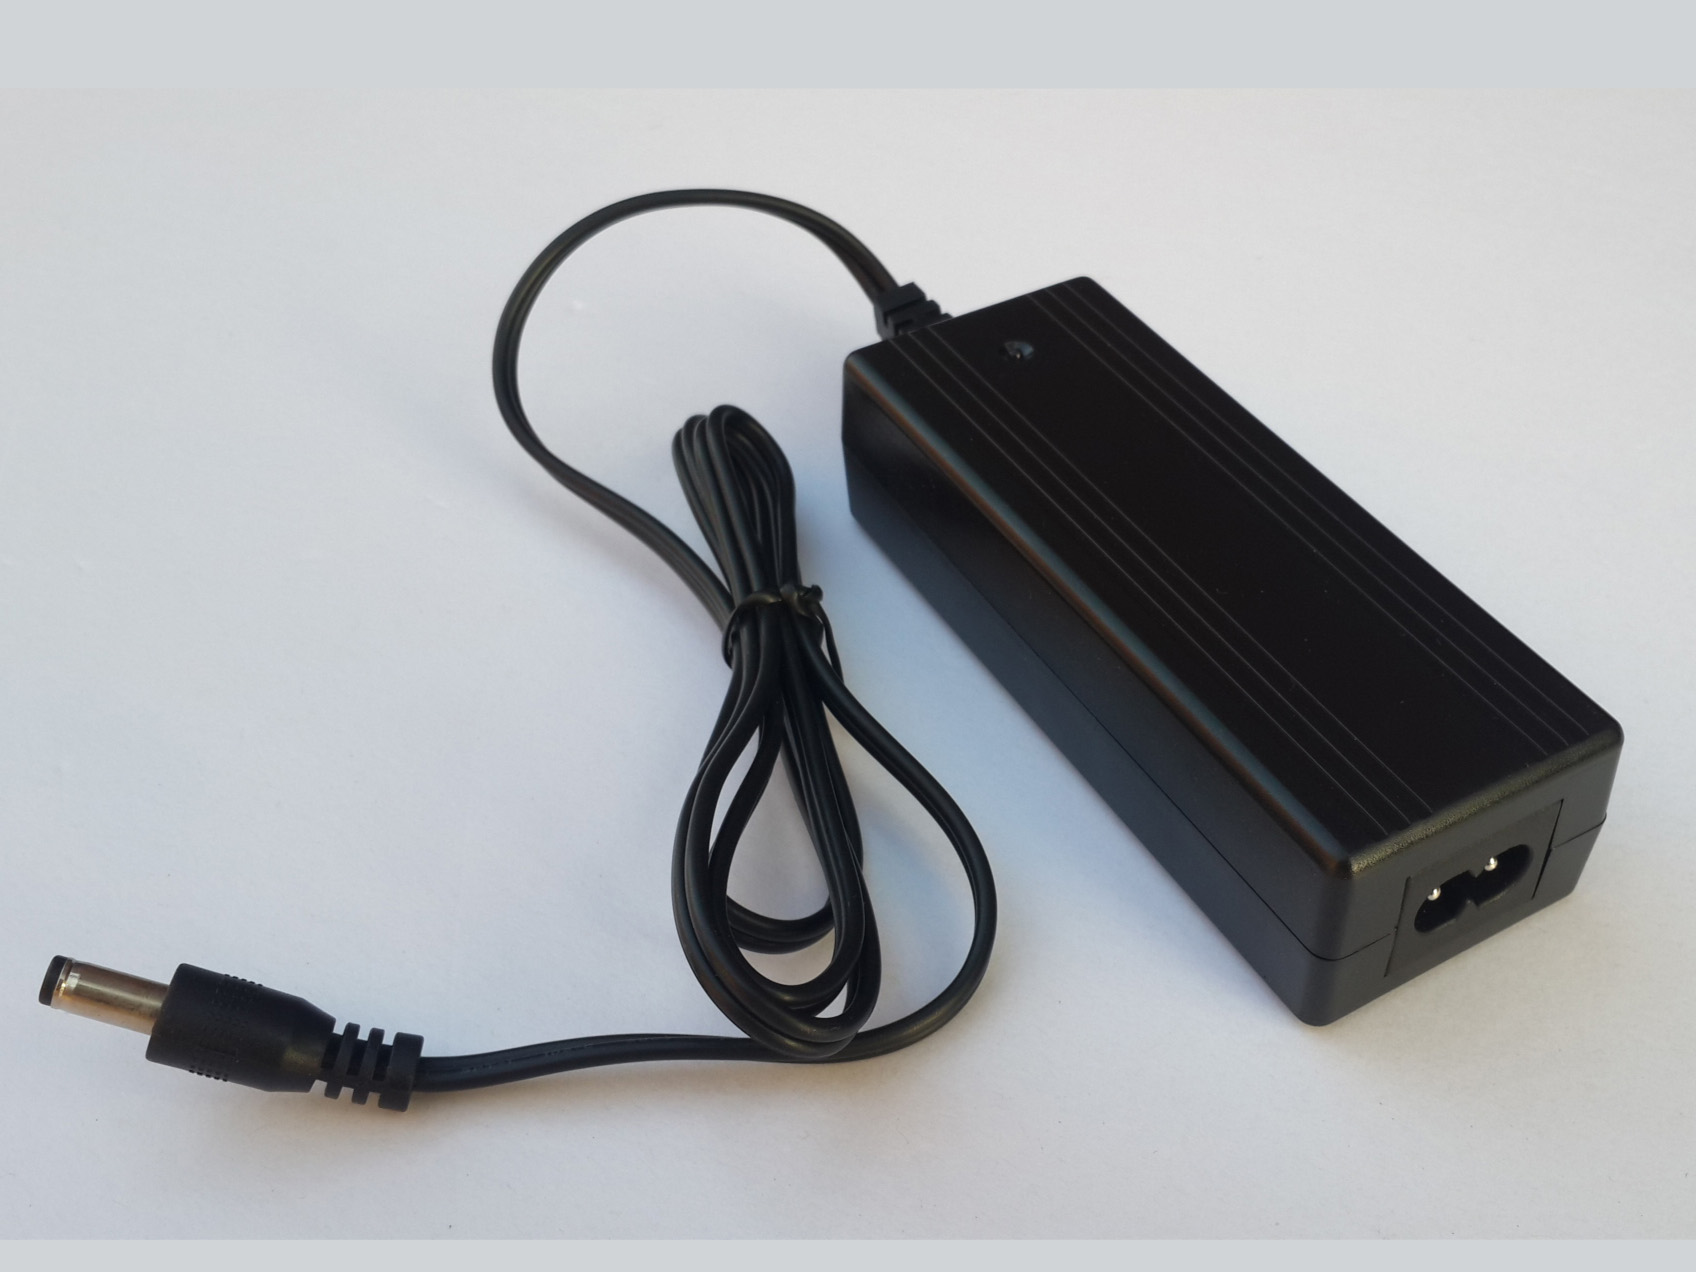 24V 1.5A power adapter with CE UL FCC approval